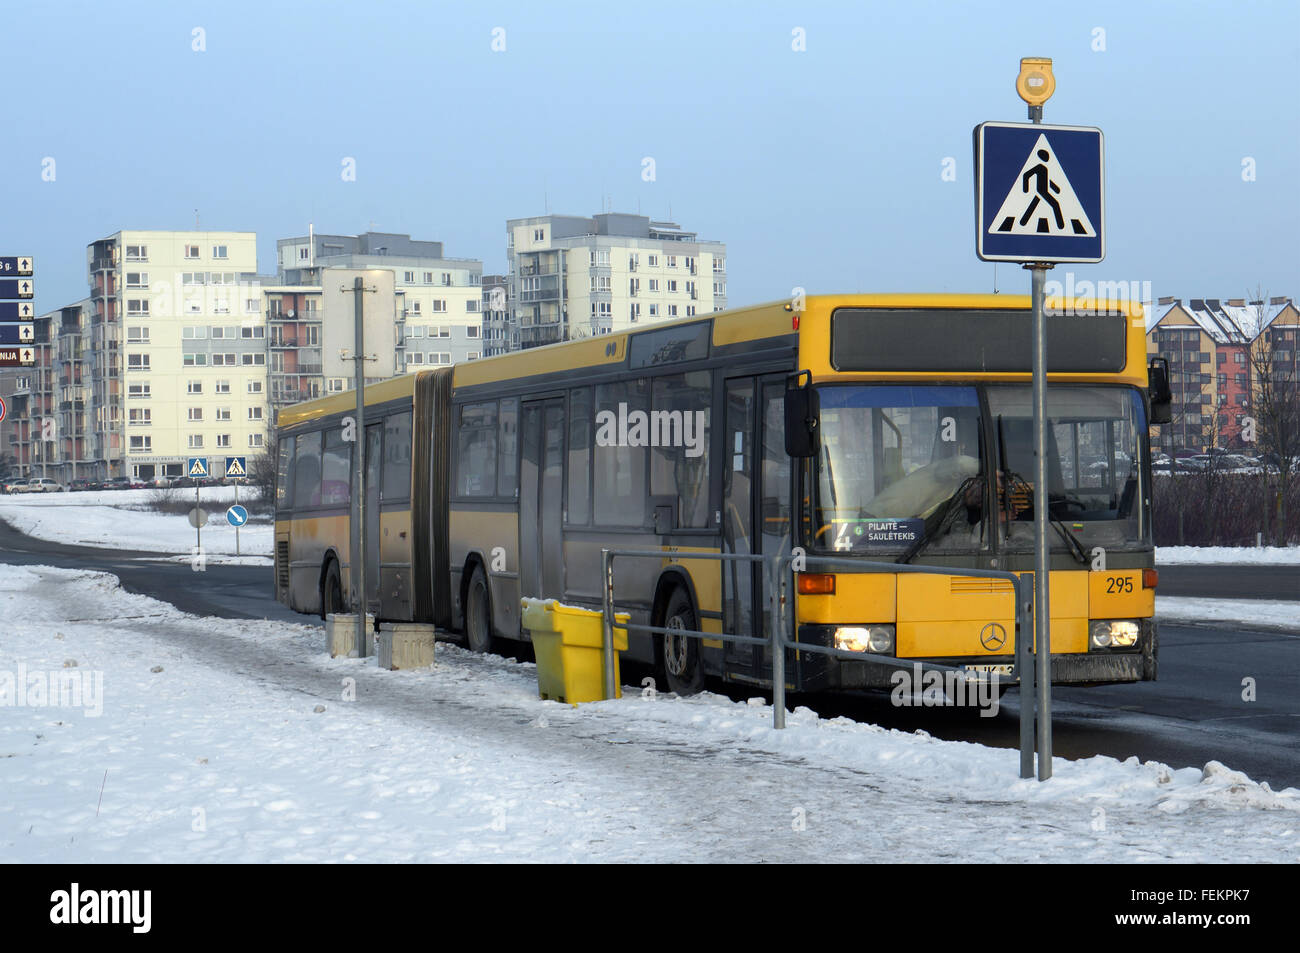 VILNIUS, LITHUANIA - JANUARY 03, 2016: The old yellow passenger city bus Mercedes at the winter  evening  frozen stop of the sma Stock Photo